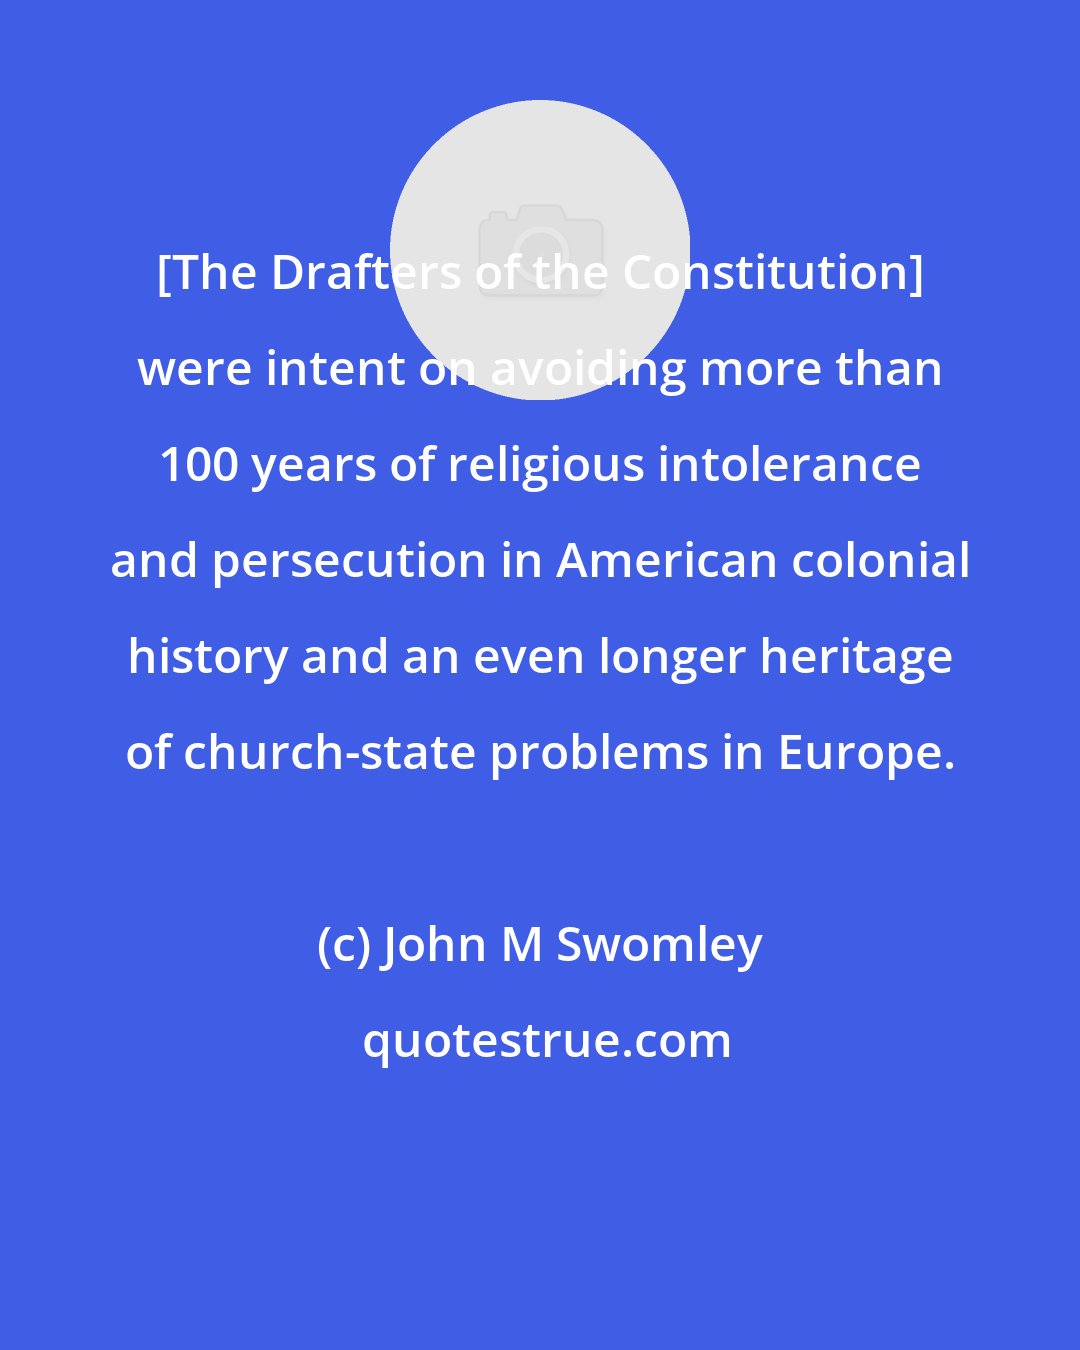 John M Swomley: [The Drafters of the Constitution] were intent on avoiding more than 100 years of religious intolerance and persecution in American colonial history and an even longer heritage of church-state problems in Europe.